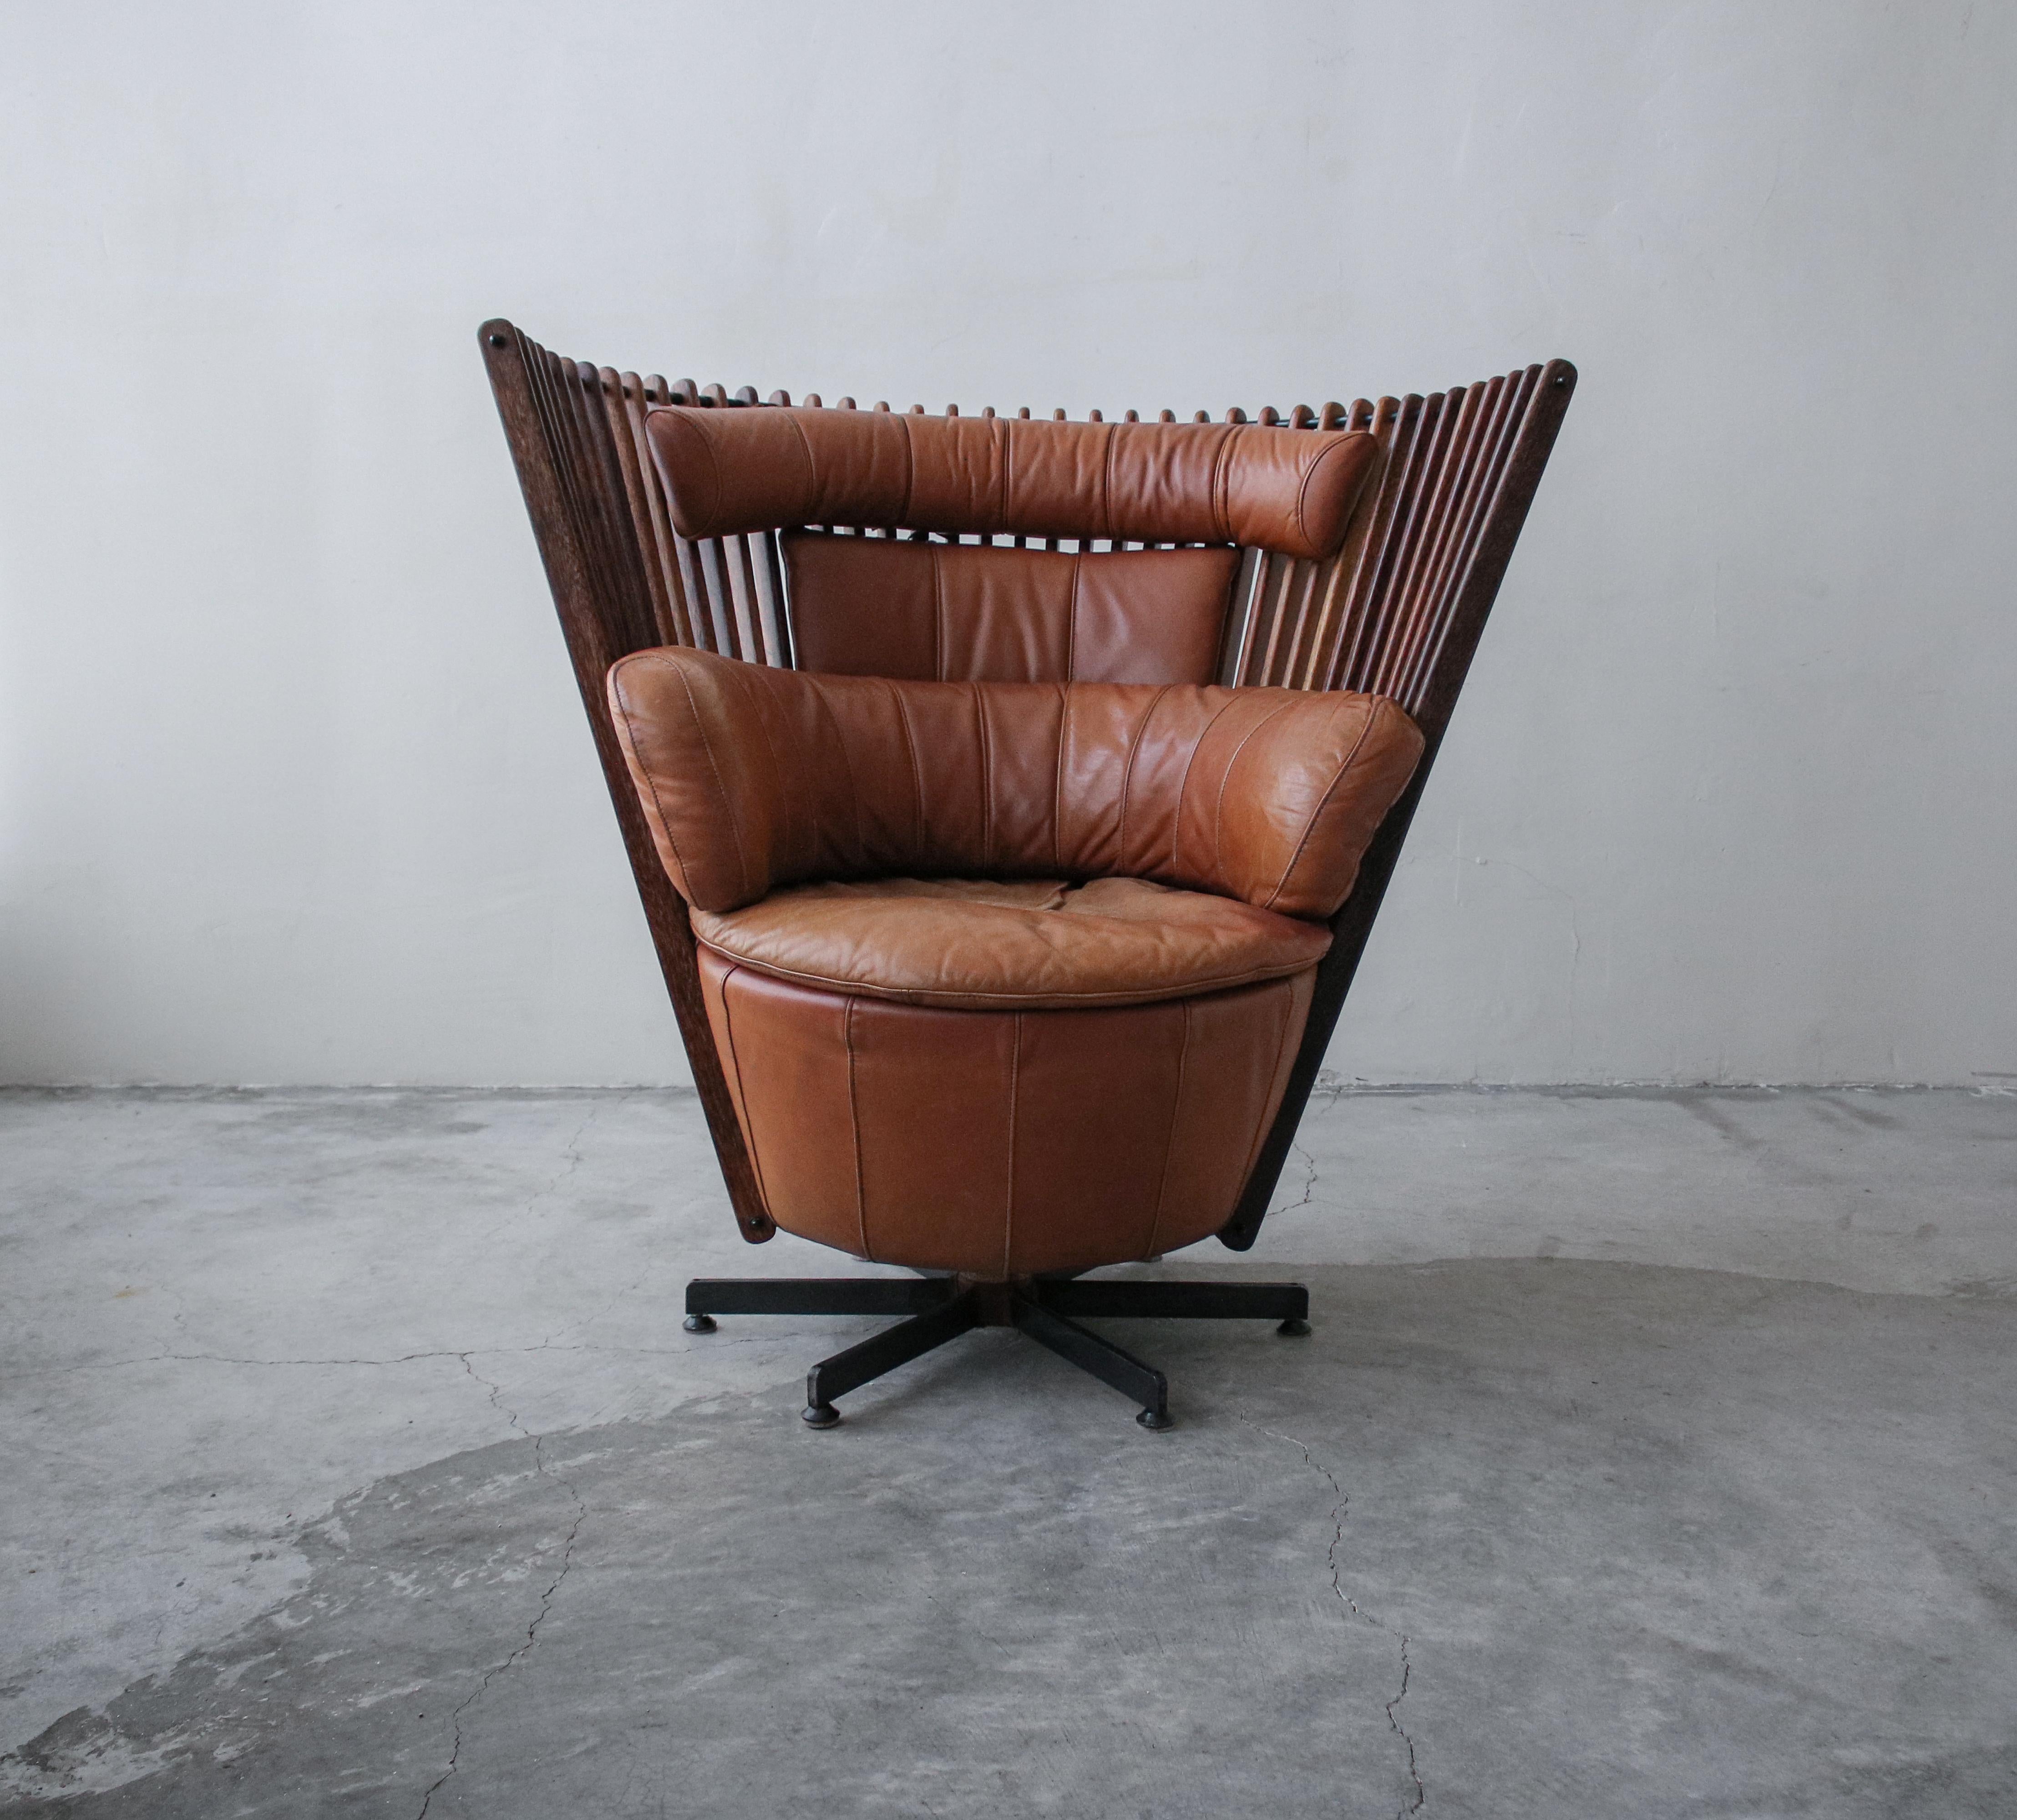 A beautiful chair designed by Pacific Green. Chair is in excellent condition. Leather shows patina from age and use, but no damage, please see images.

